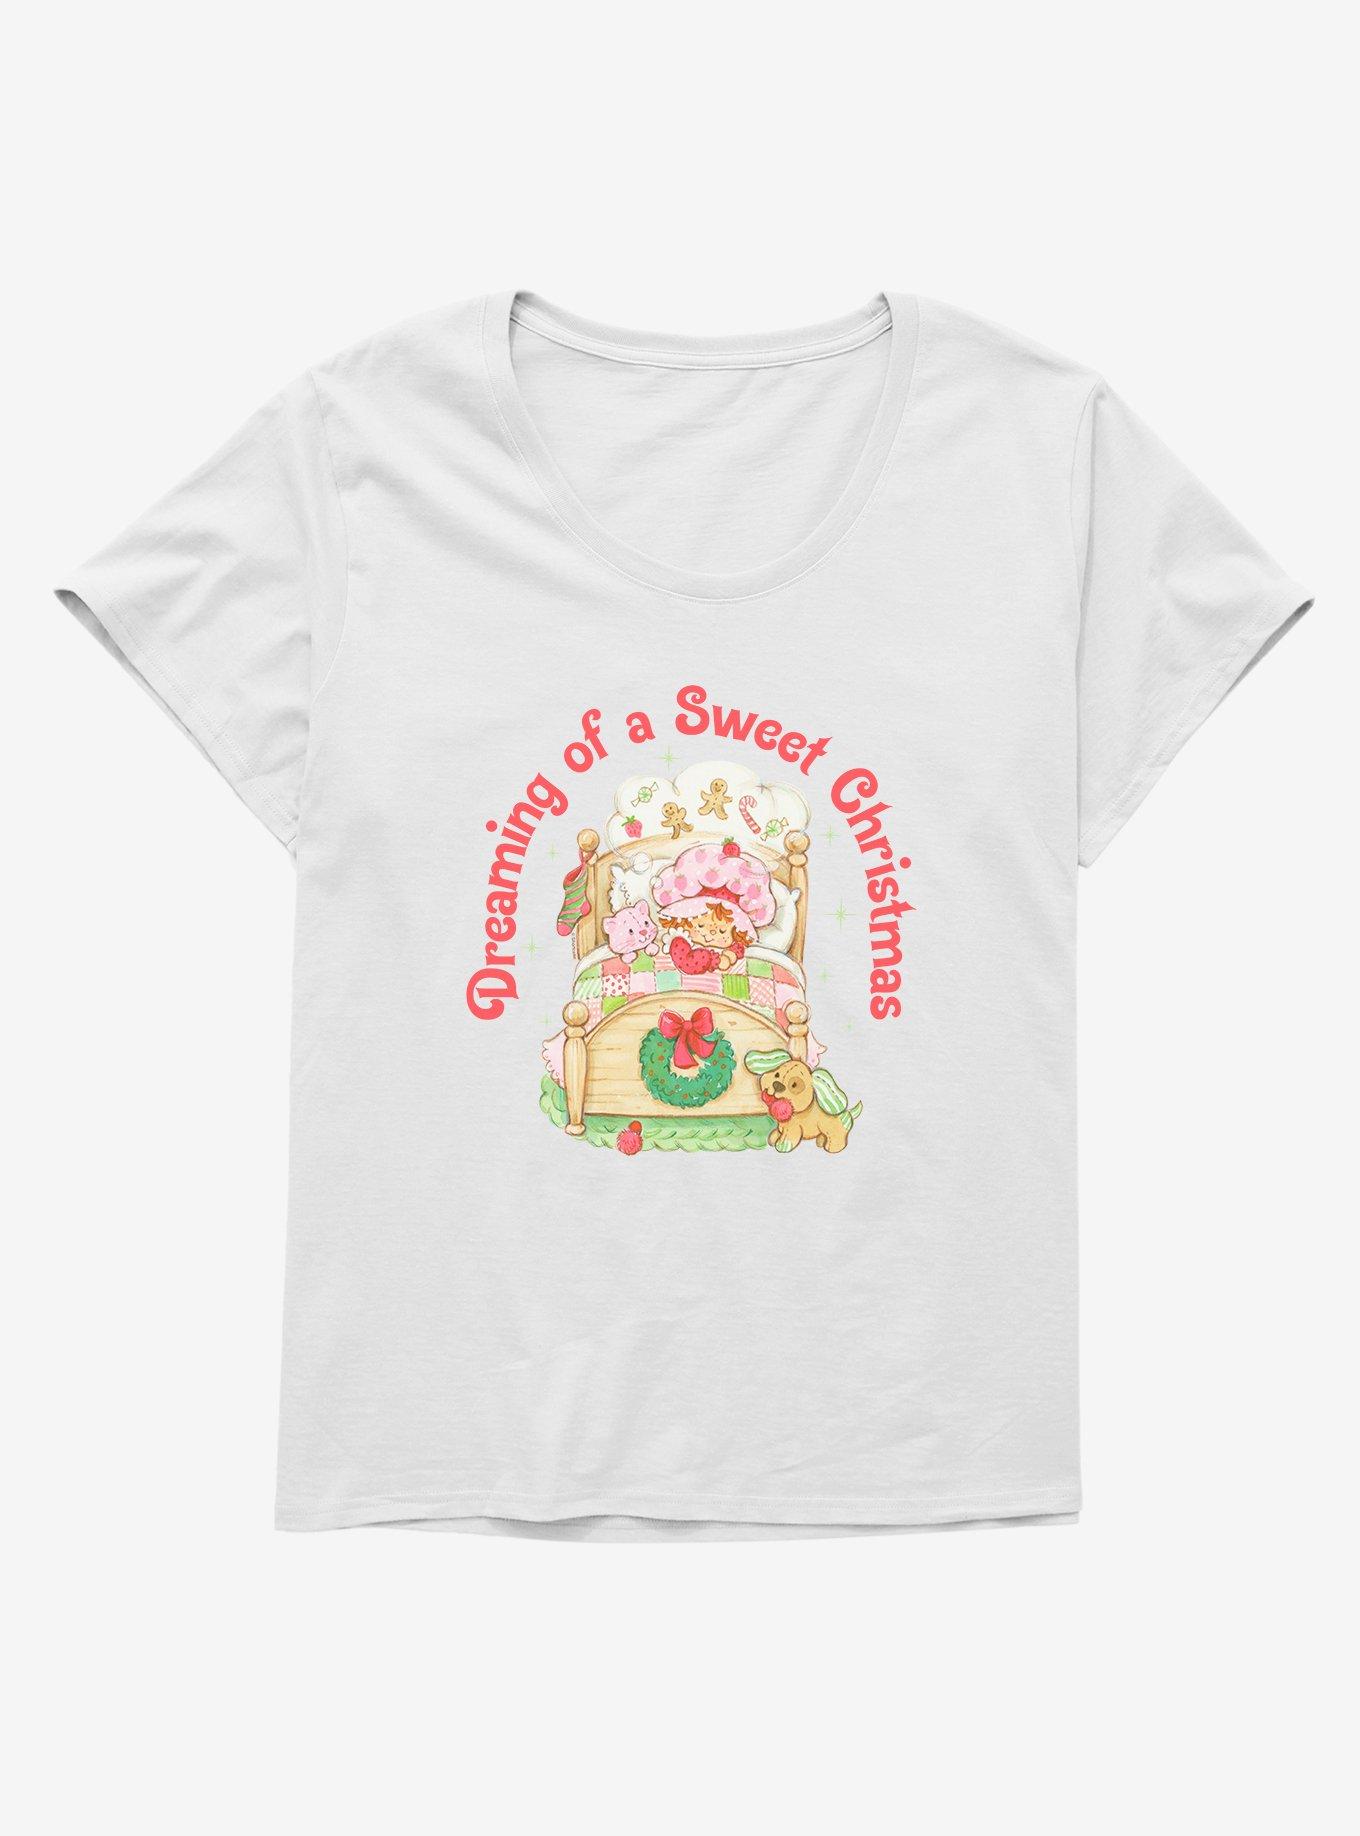 Strawberry Shortcake Dreaming Of A Sweet Christmas Womens T-Shirt Plus Size, WHITE, hi-res